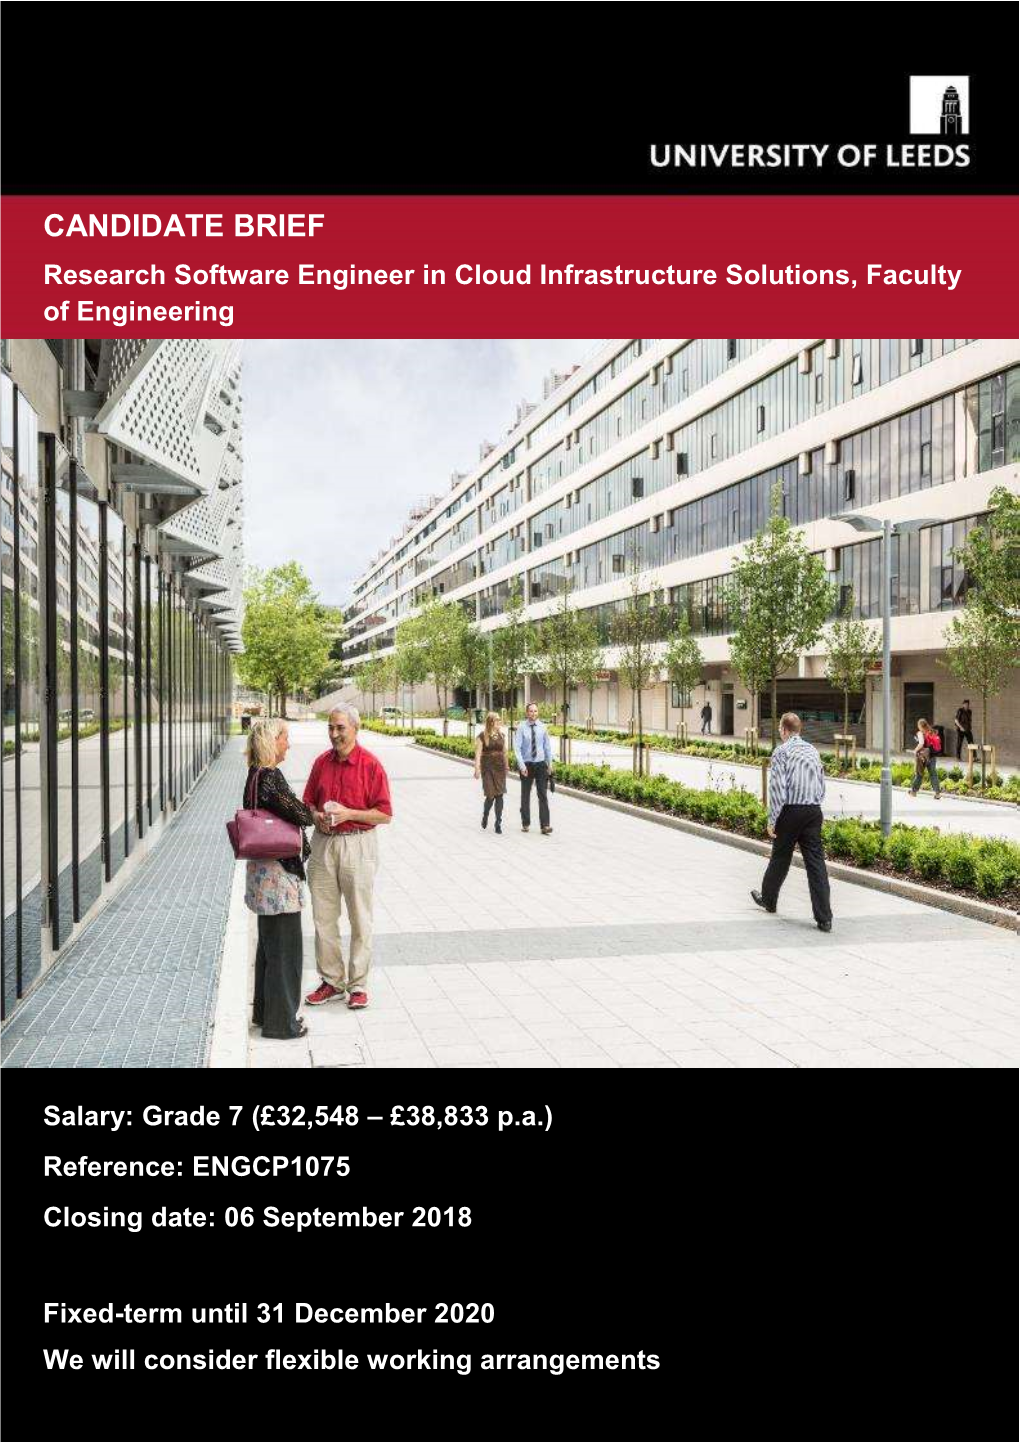 Research Software Engineer in Cloud Infrastructure Solutions, Faculty of Engineering